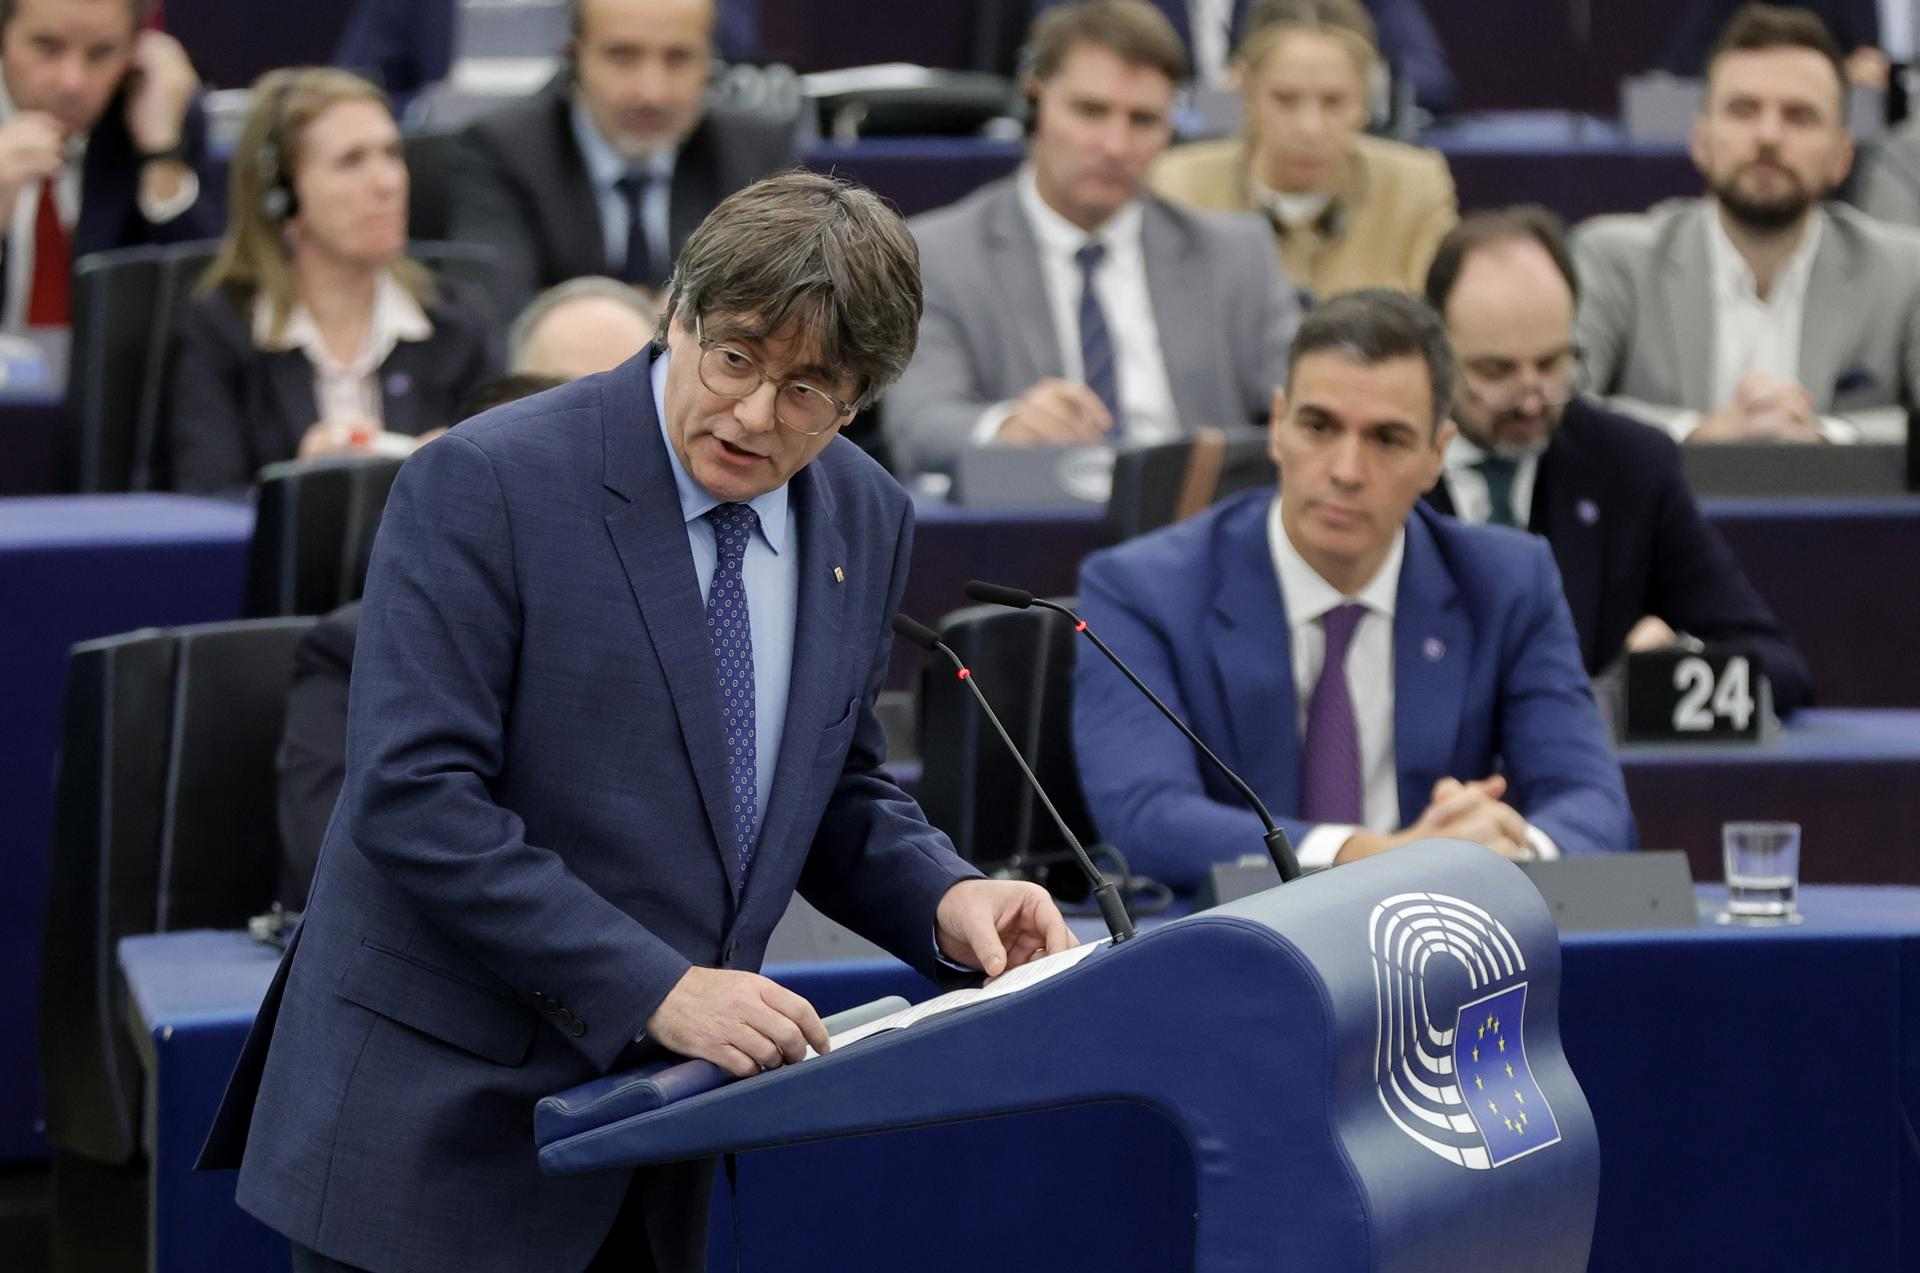 Puigdemont warns Sánchez over Catalan language: "Missed chances can have unpleasant consequences"